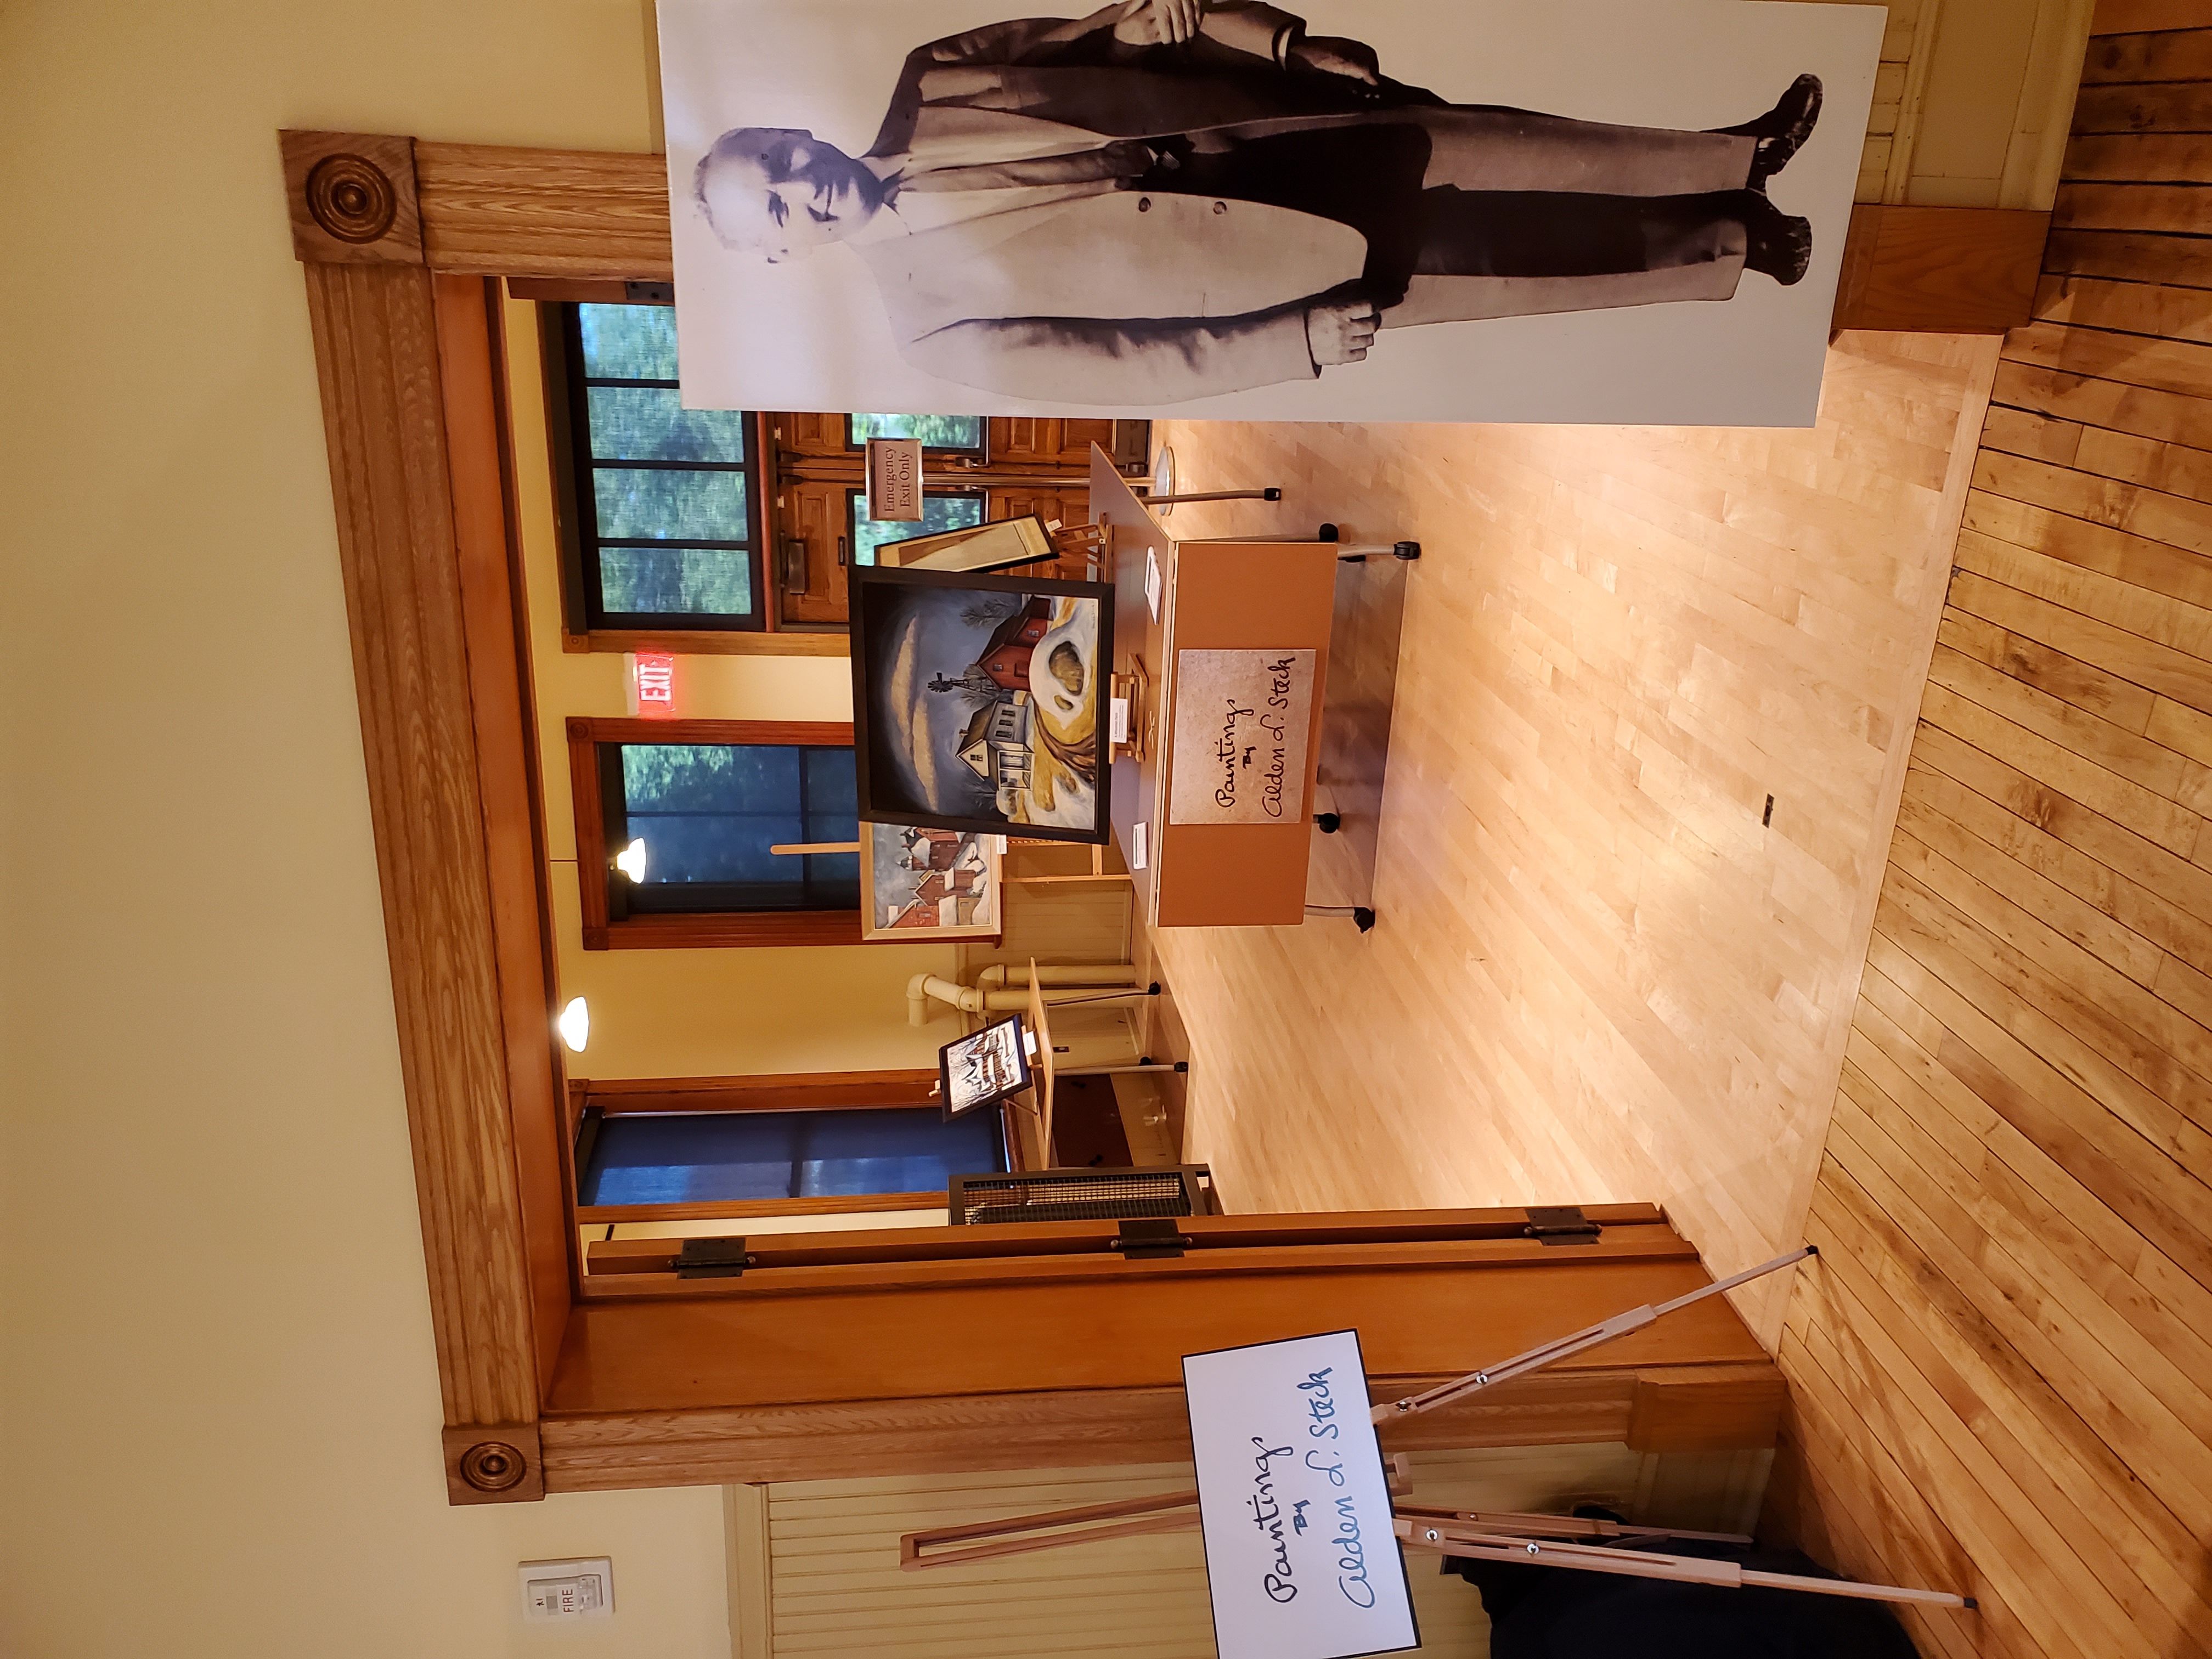 A photo exhibit in a historic building. A historic image of an artist introduces an exhibit at the Calumet Visitor Center.